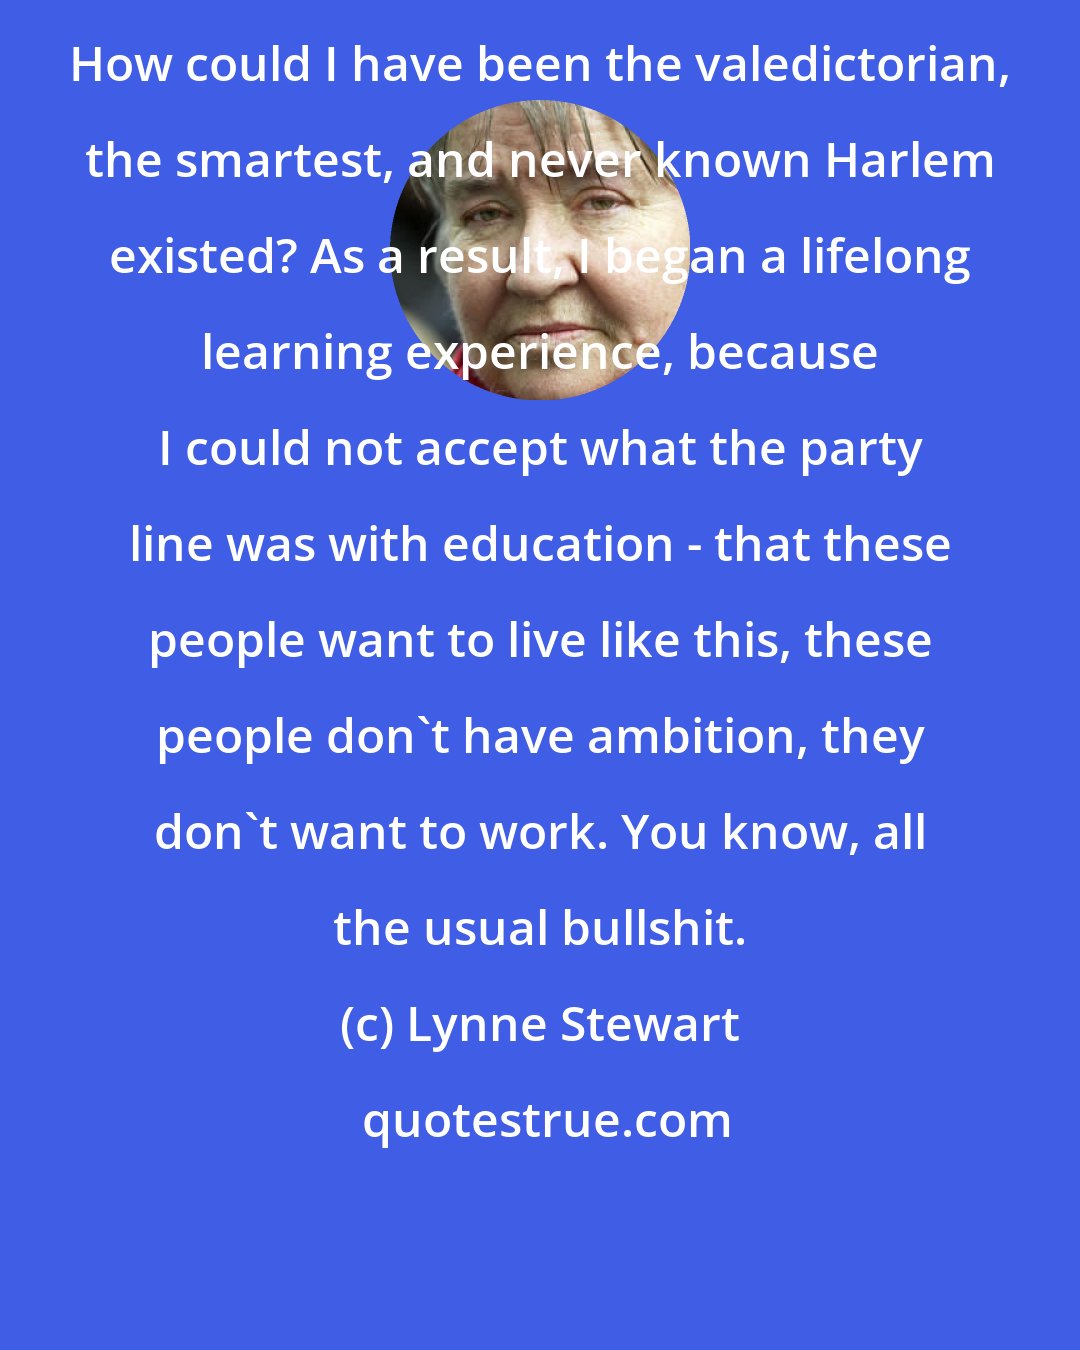 Lynne Stewart: How could I have been the valedictorian, the smartest, and never known Harlem existed? As a result, I began a lifelong learning experience, because I could not accept what the party line was with education - that these people want to live like this, these people don't have ambition, they don't want to work. You know, all the usual bullshit.